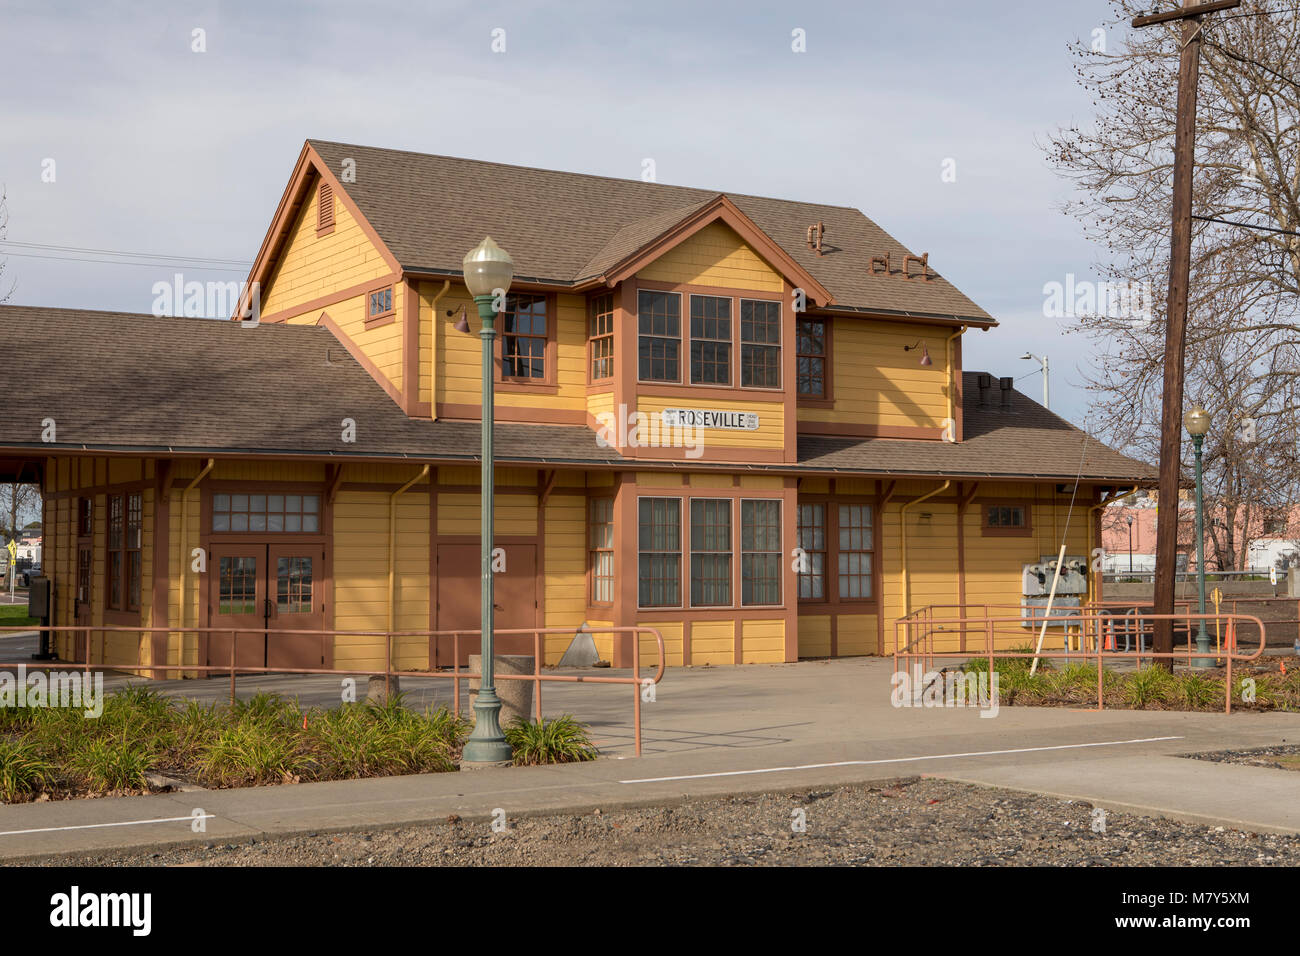 Historical railroad station in Roseville California. Neat and clean wooden heritage building in the downtown area. Stock Photo